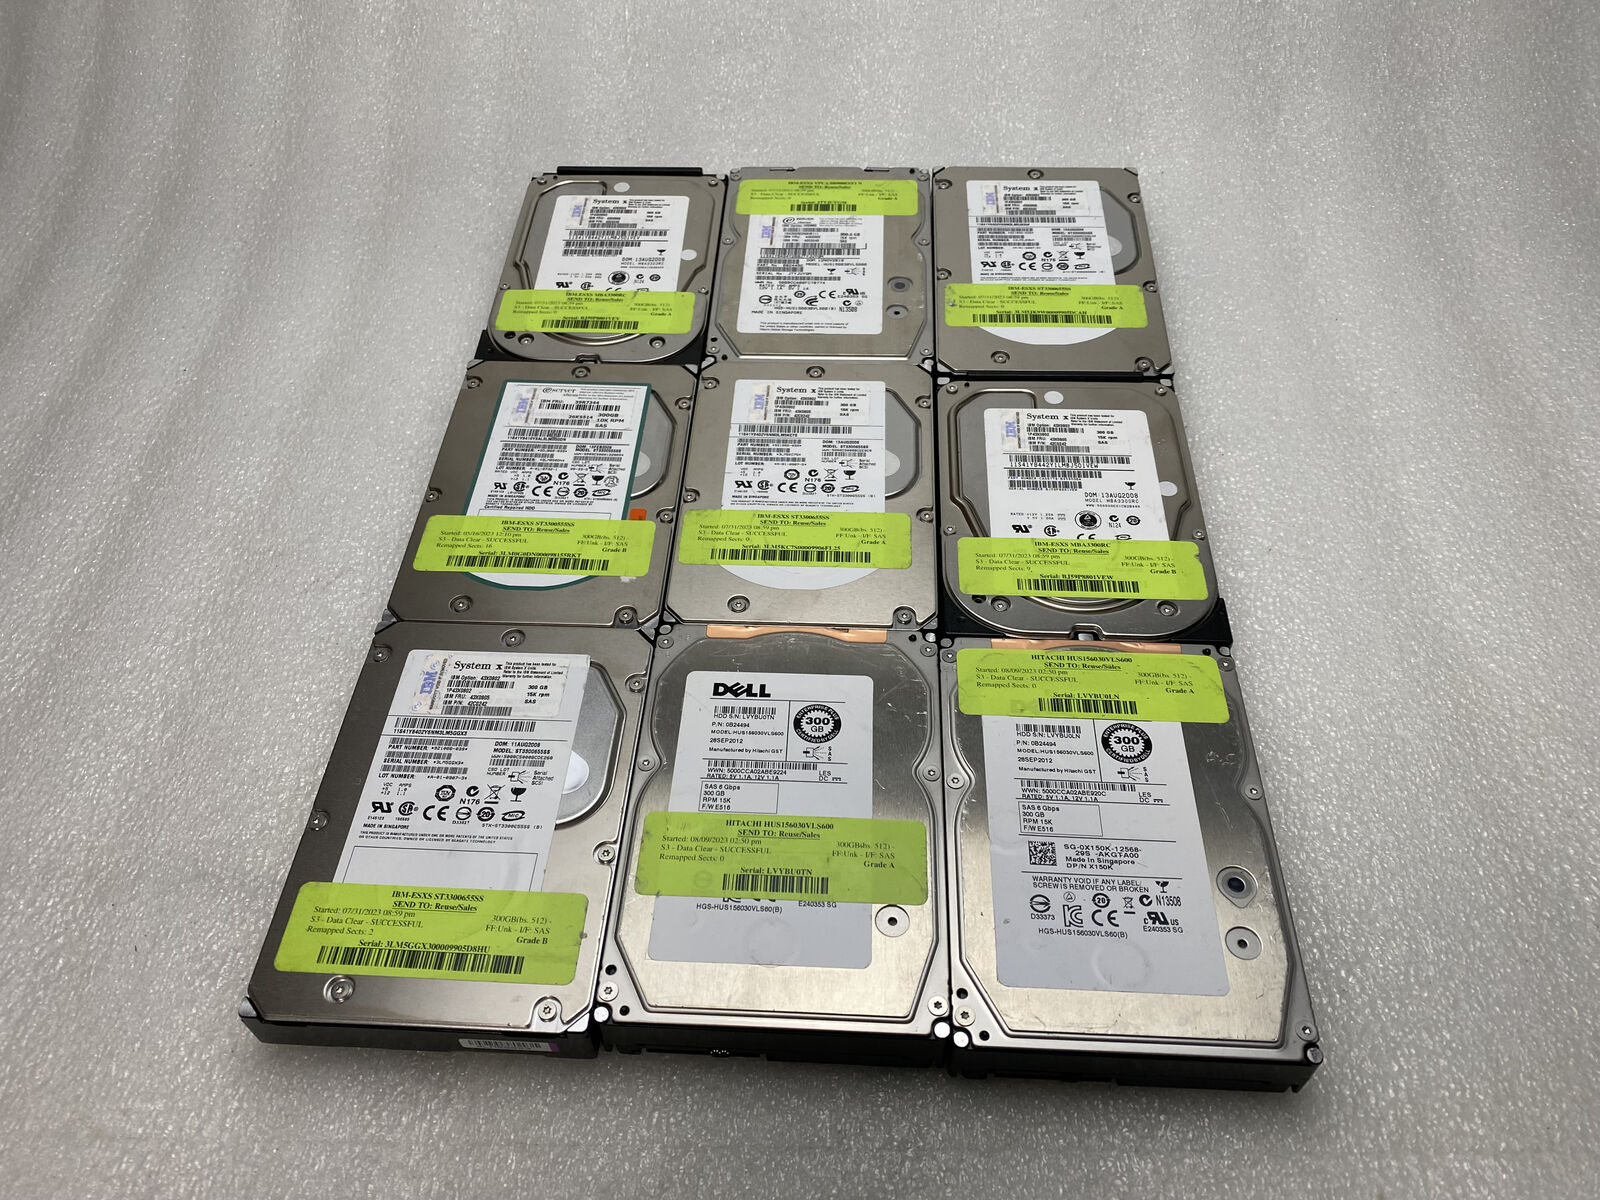 Lot of 9 Mixed Brand Mixed Model 300 GB 3.5\